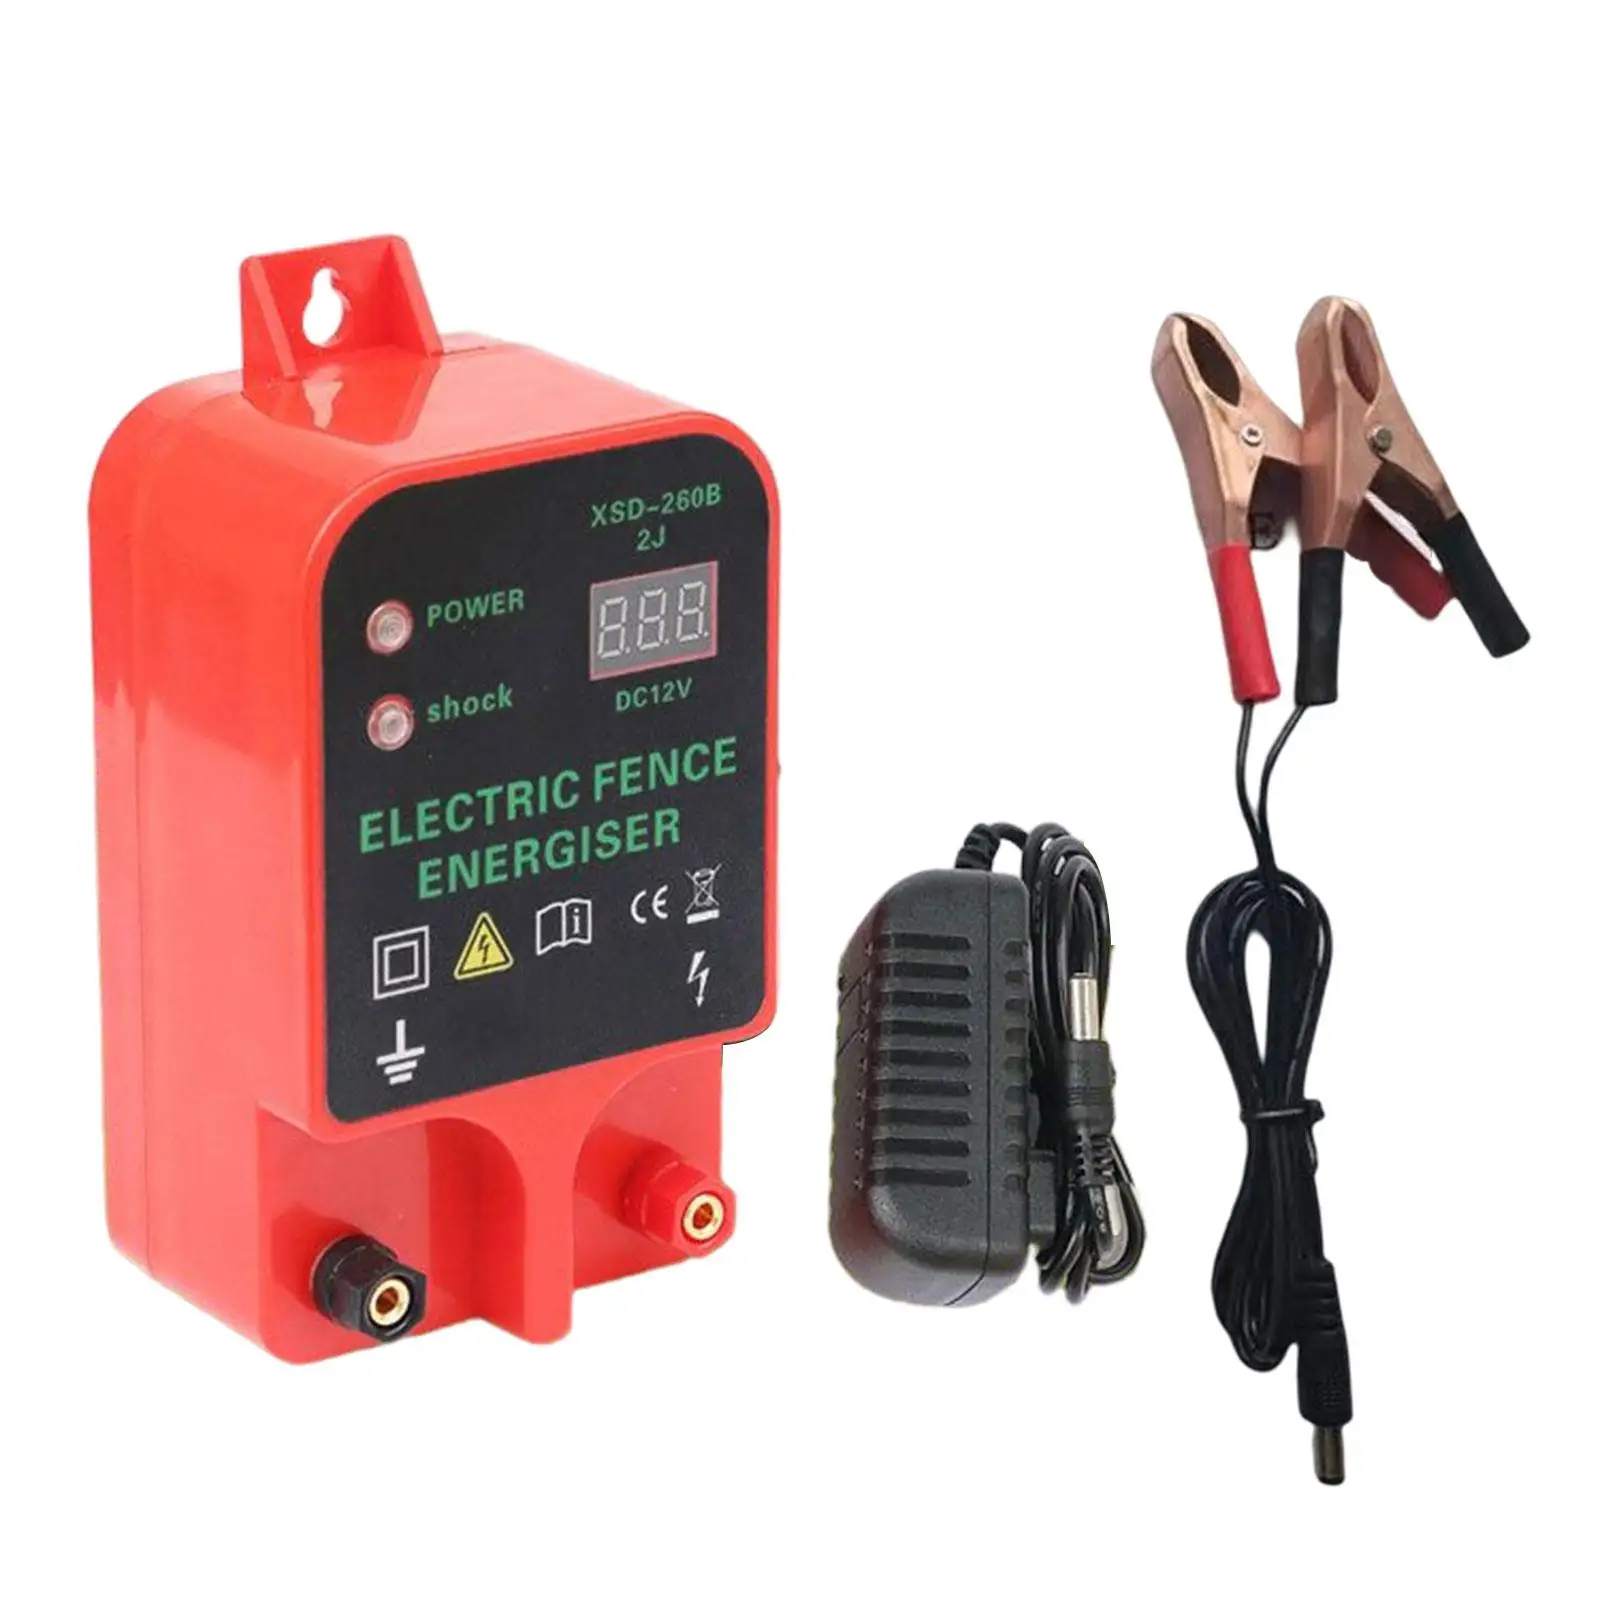 Electronic Fence EU Plug High Decibel Alarm High Voltage Pulse with Battery Power Clip Connector LCD Display Controller for Dogs